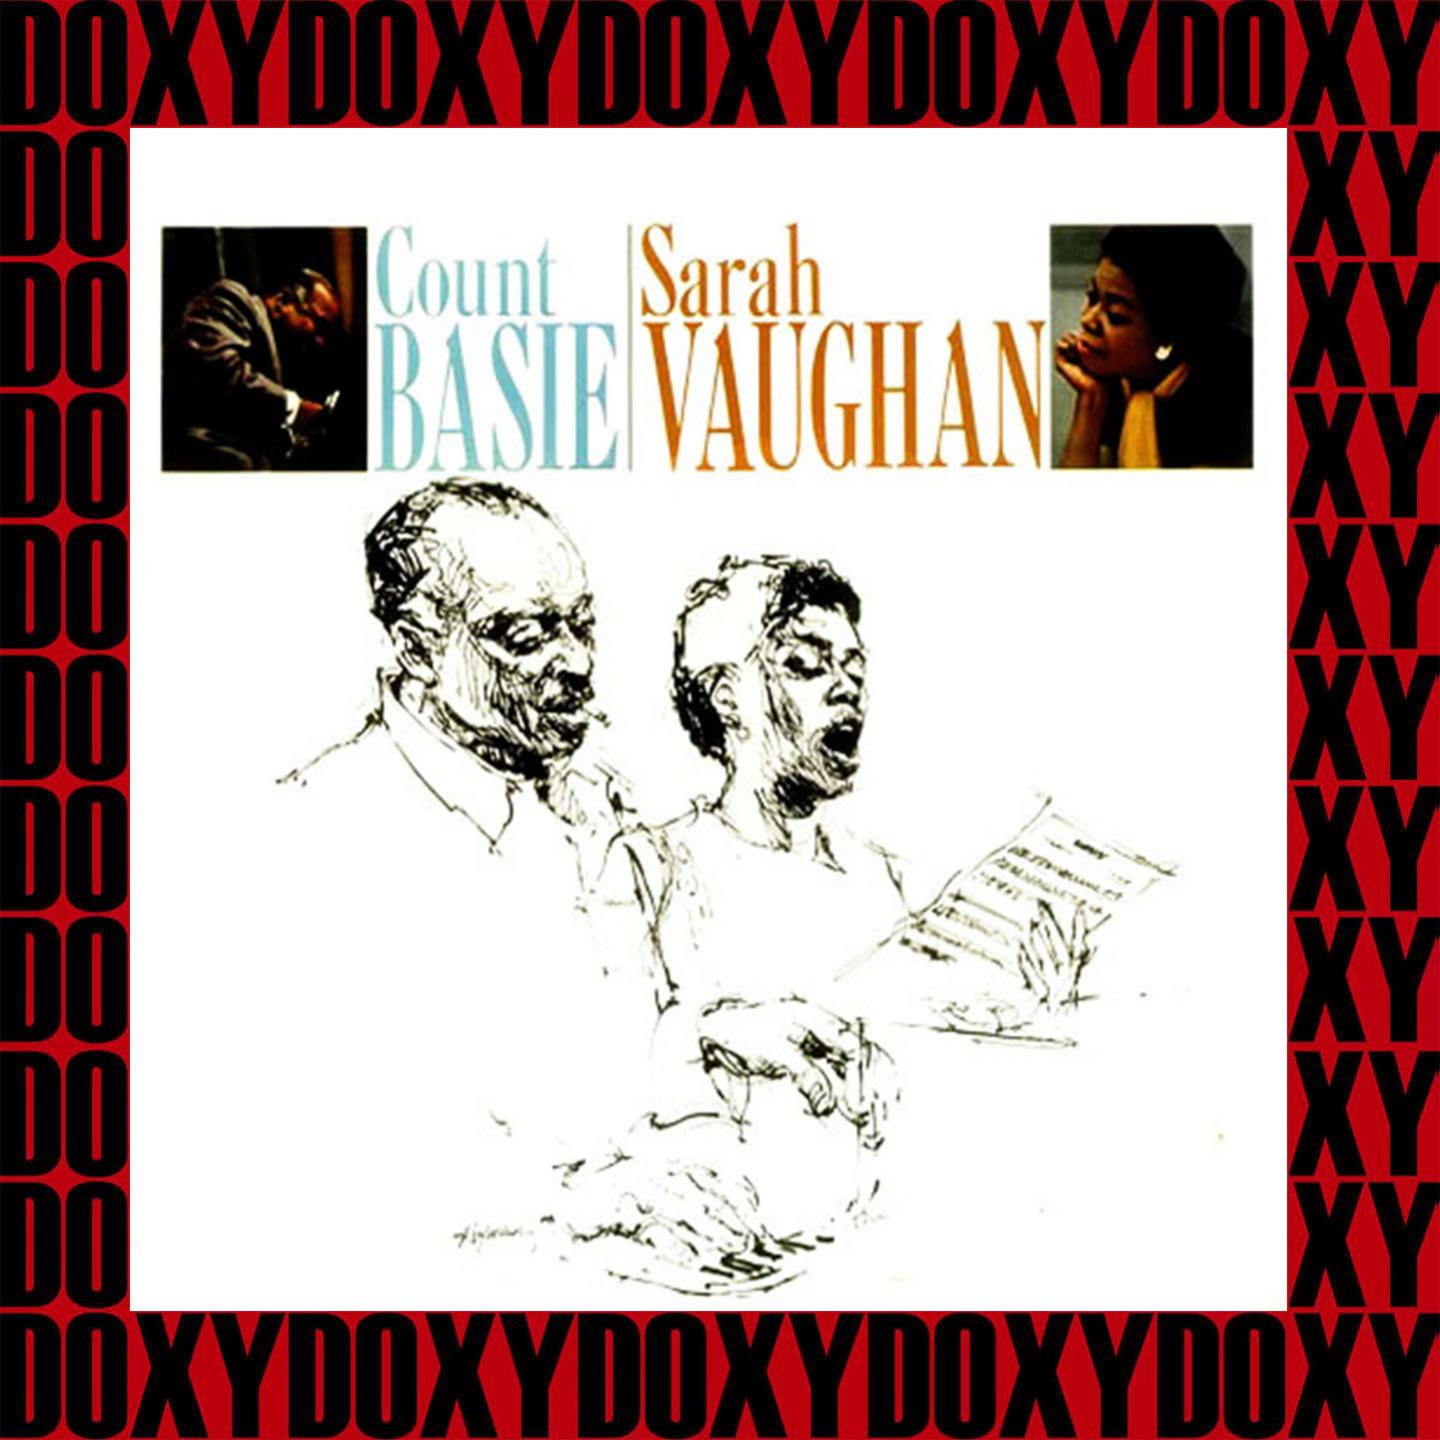 Count Basie/Sarah Vaughan (Expanded, Remastered Version) (Doxy Collection)